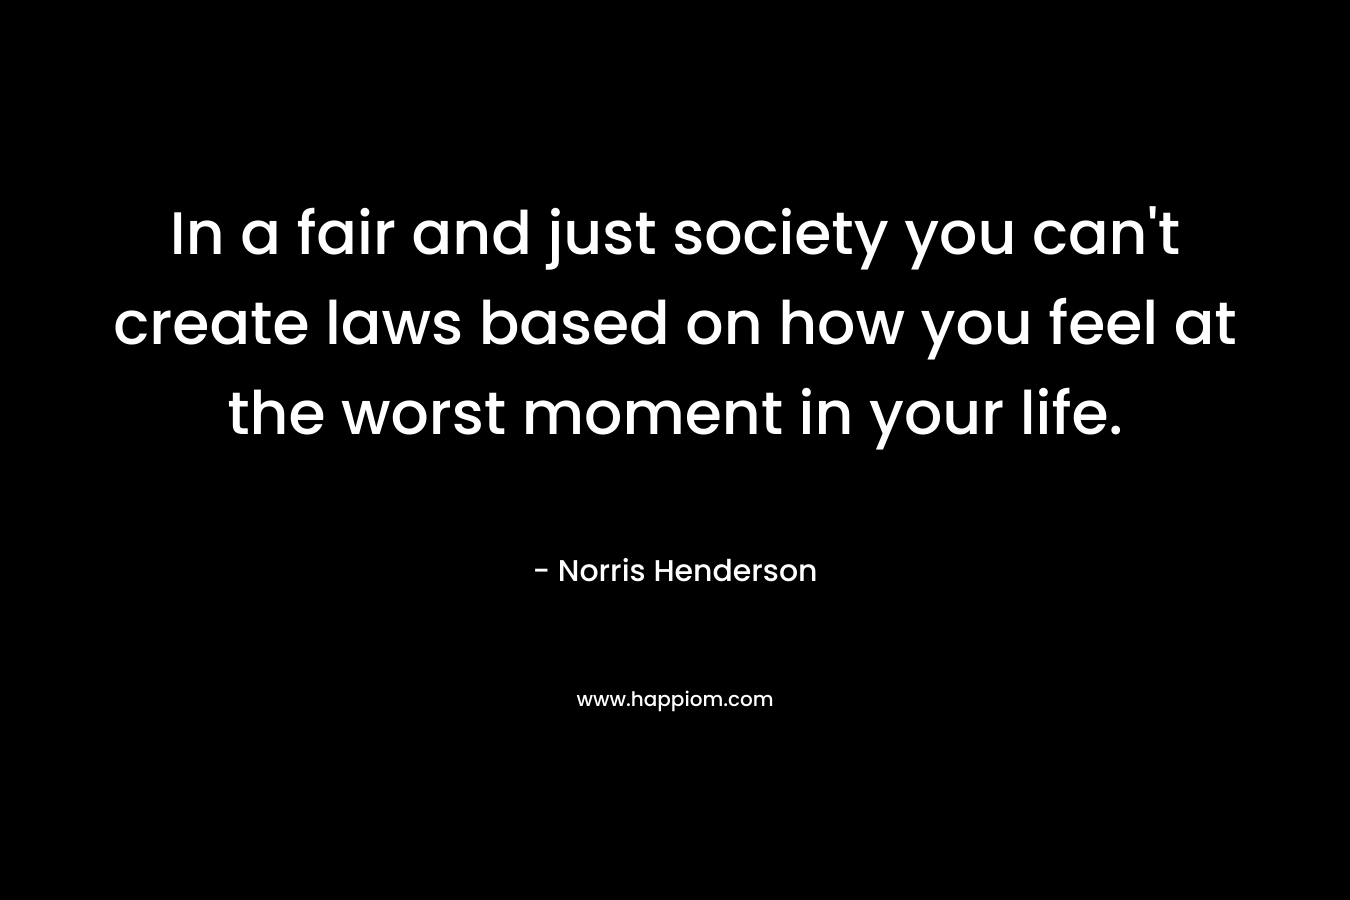 In a fair and just society you can't create laws based on how you feel at the worst moment in your life.